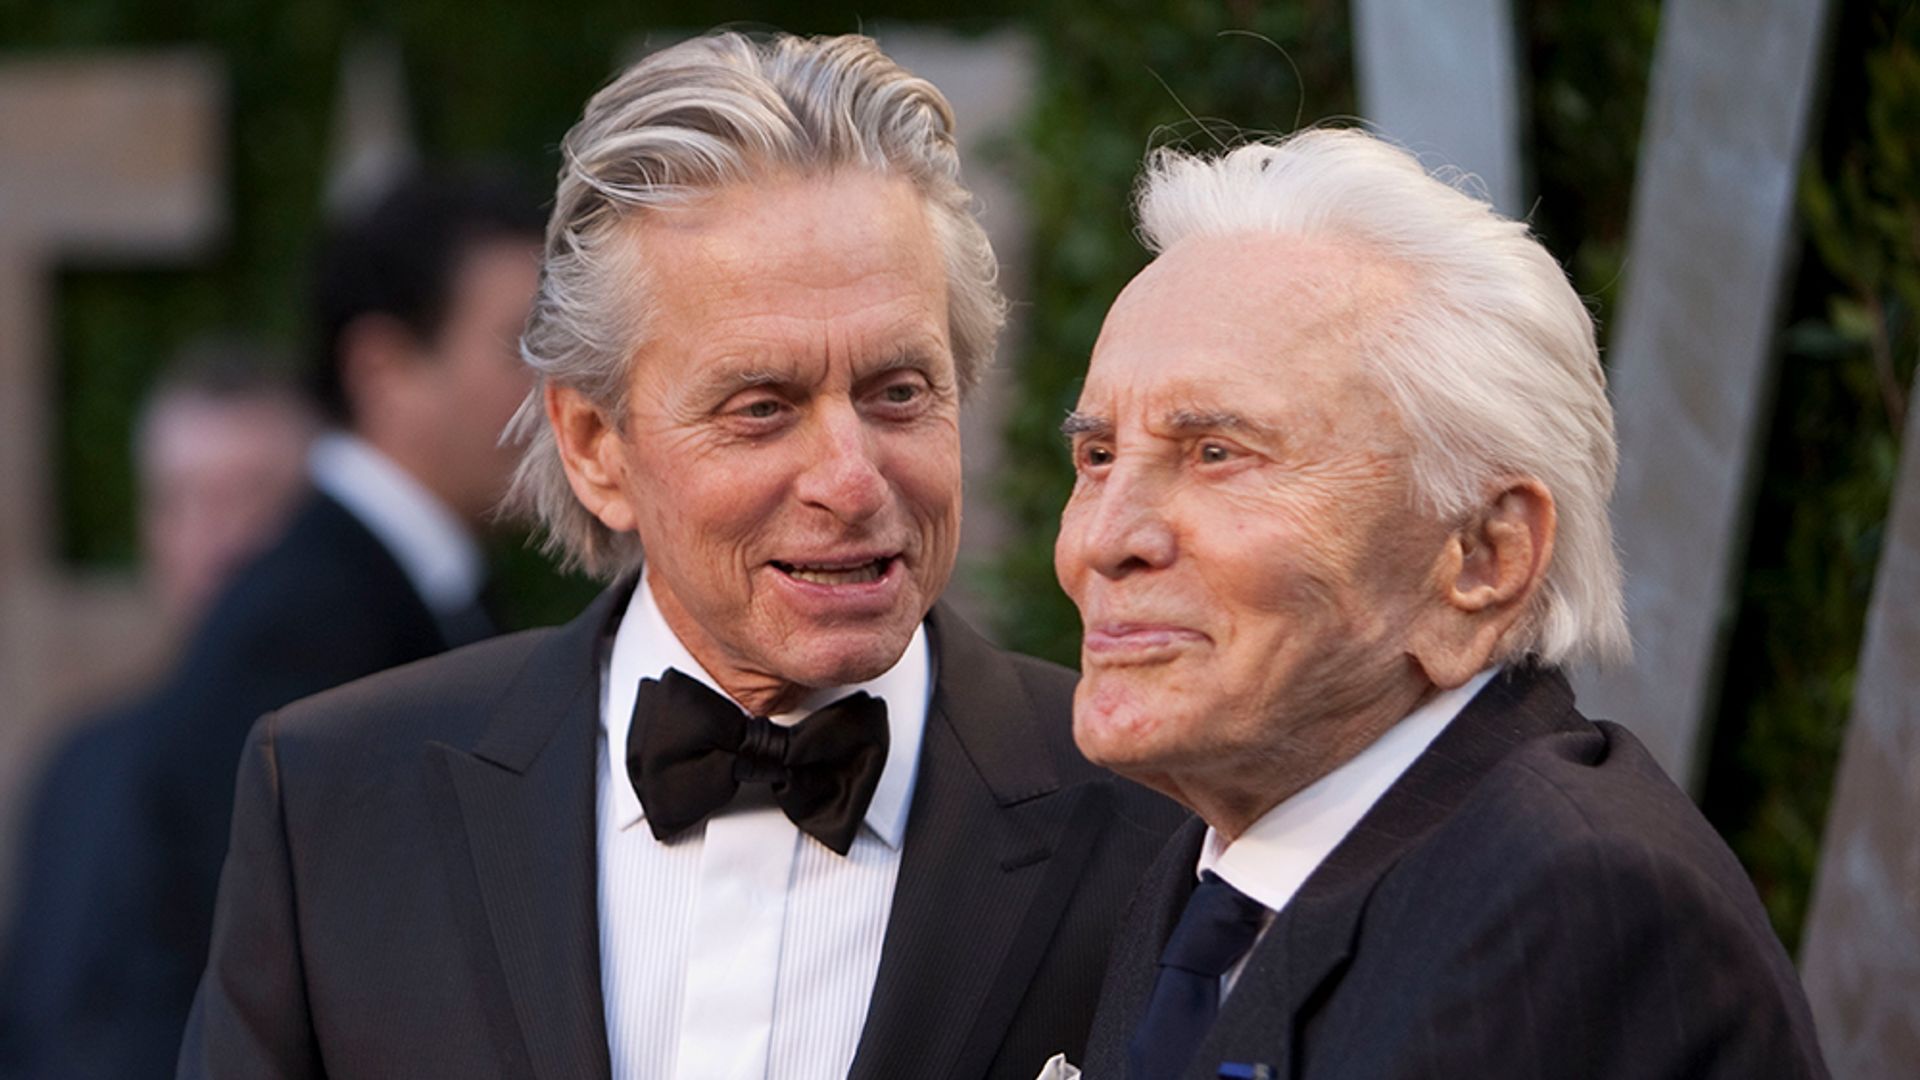 Michael and Kirk Douglas at the Vanity Fair Oscar Party in 2012